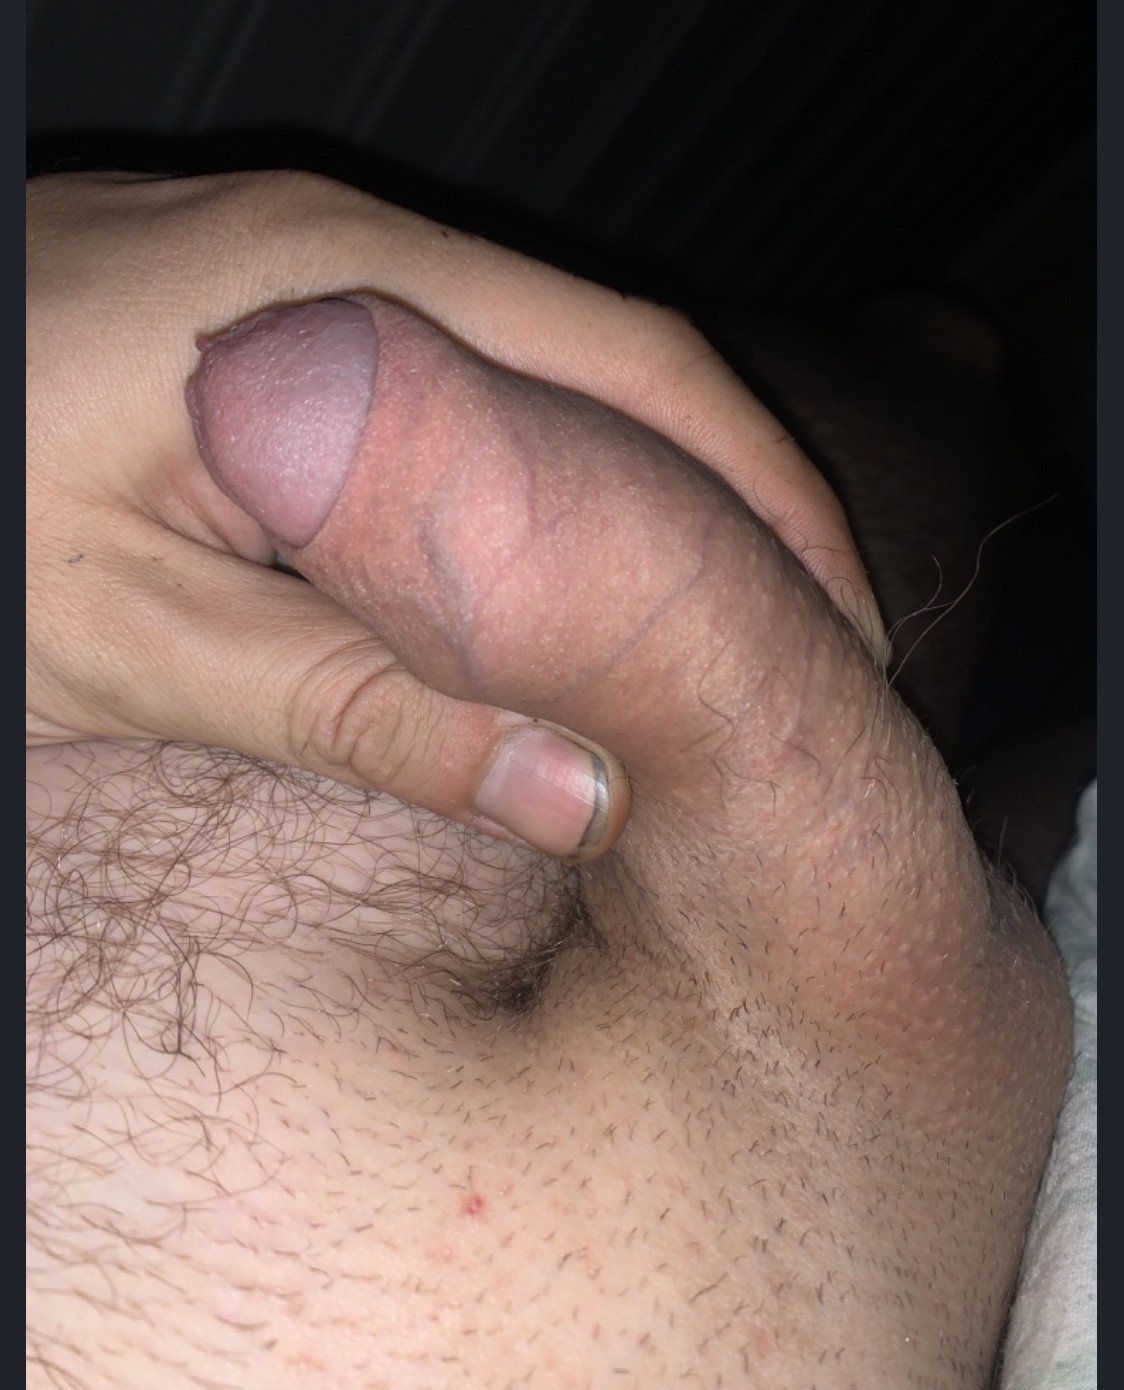 Photo by Bi-dude96 with the username @Bi-dude96,  September 7, 2020 at 4:32 AM. The post is about the topic Bi and Curious and the text says 'So damn horny this morning! Wish I was filled up by a big cock ❤️'